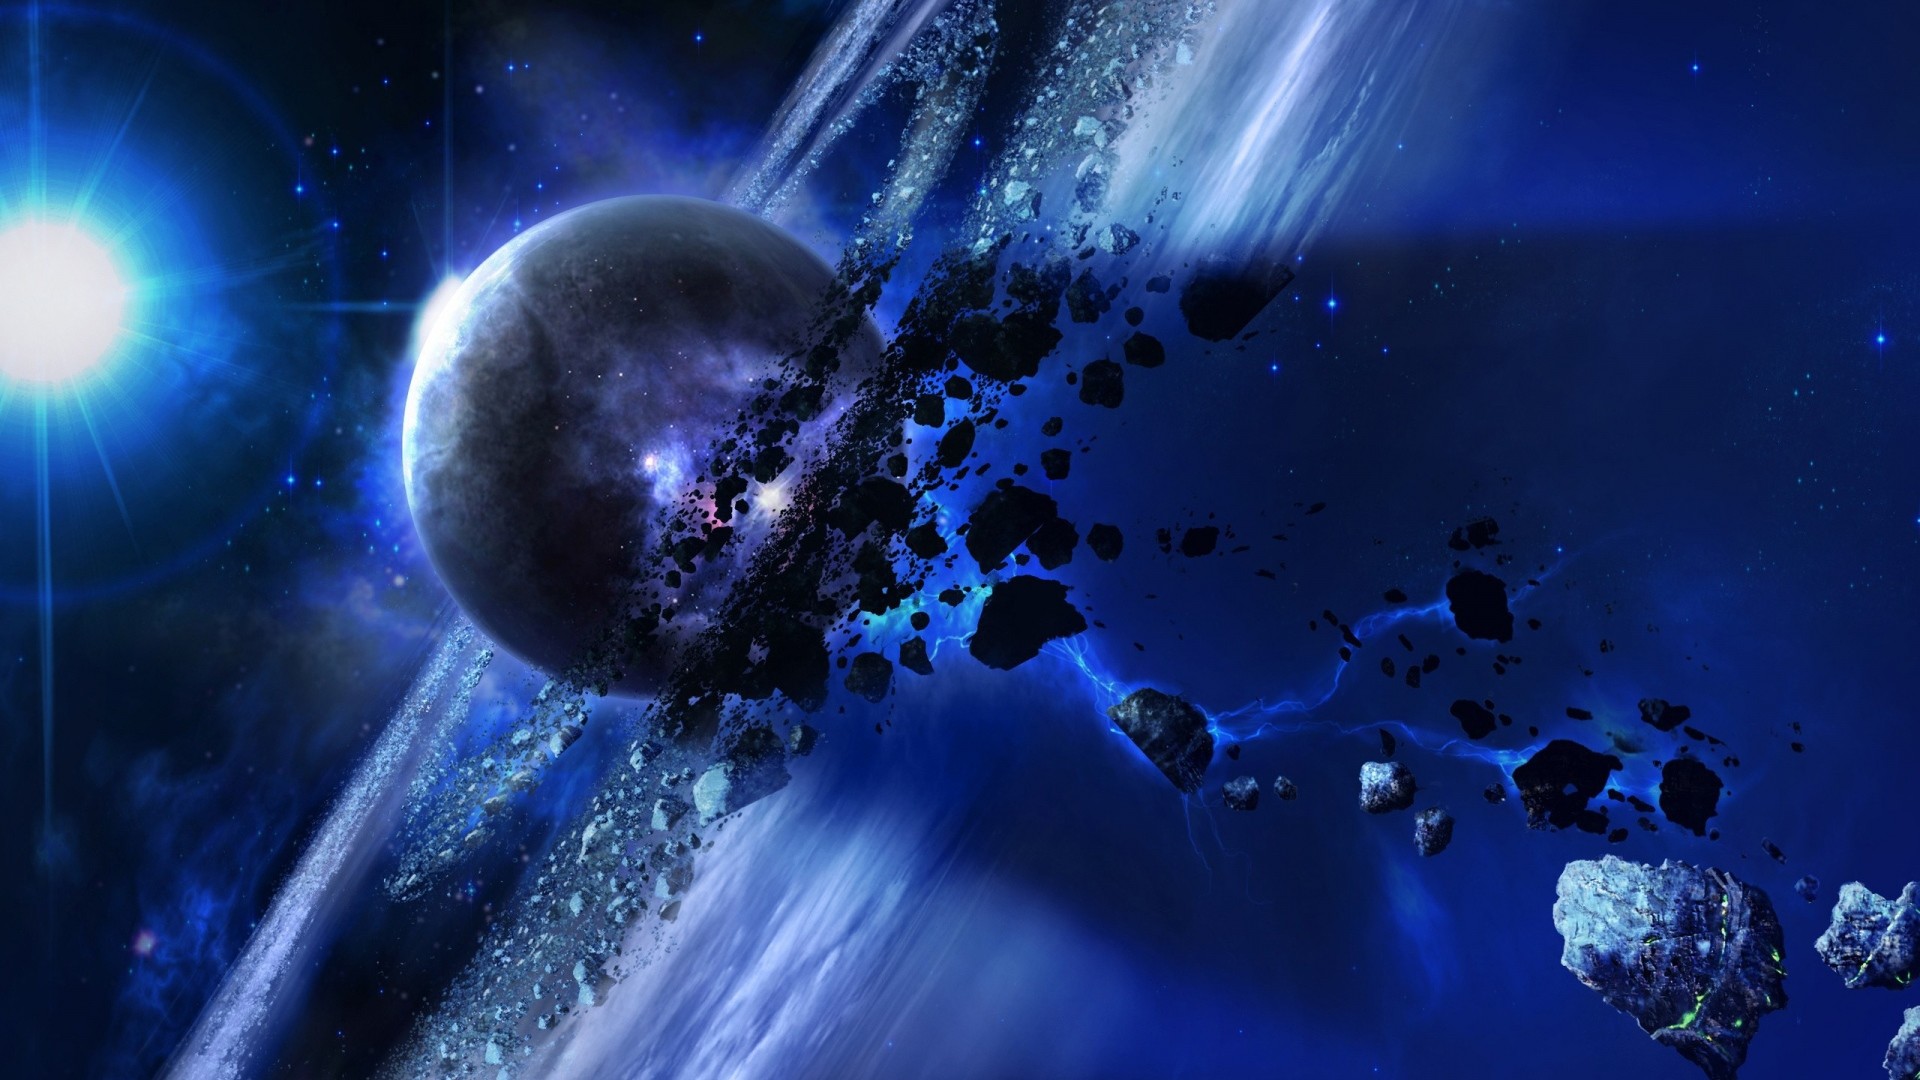 1920x1080 asteroid impact explosion wallpaper 1600x1200 resolution - wallpaper   space planets asteroid